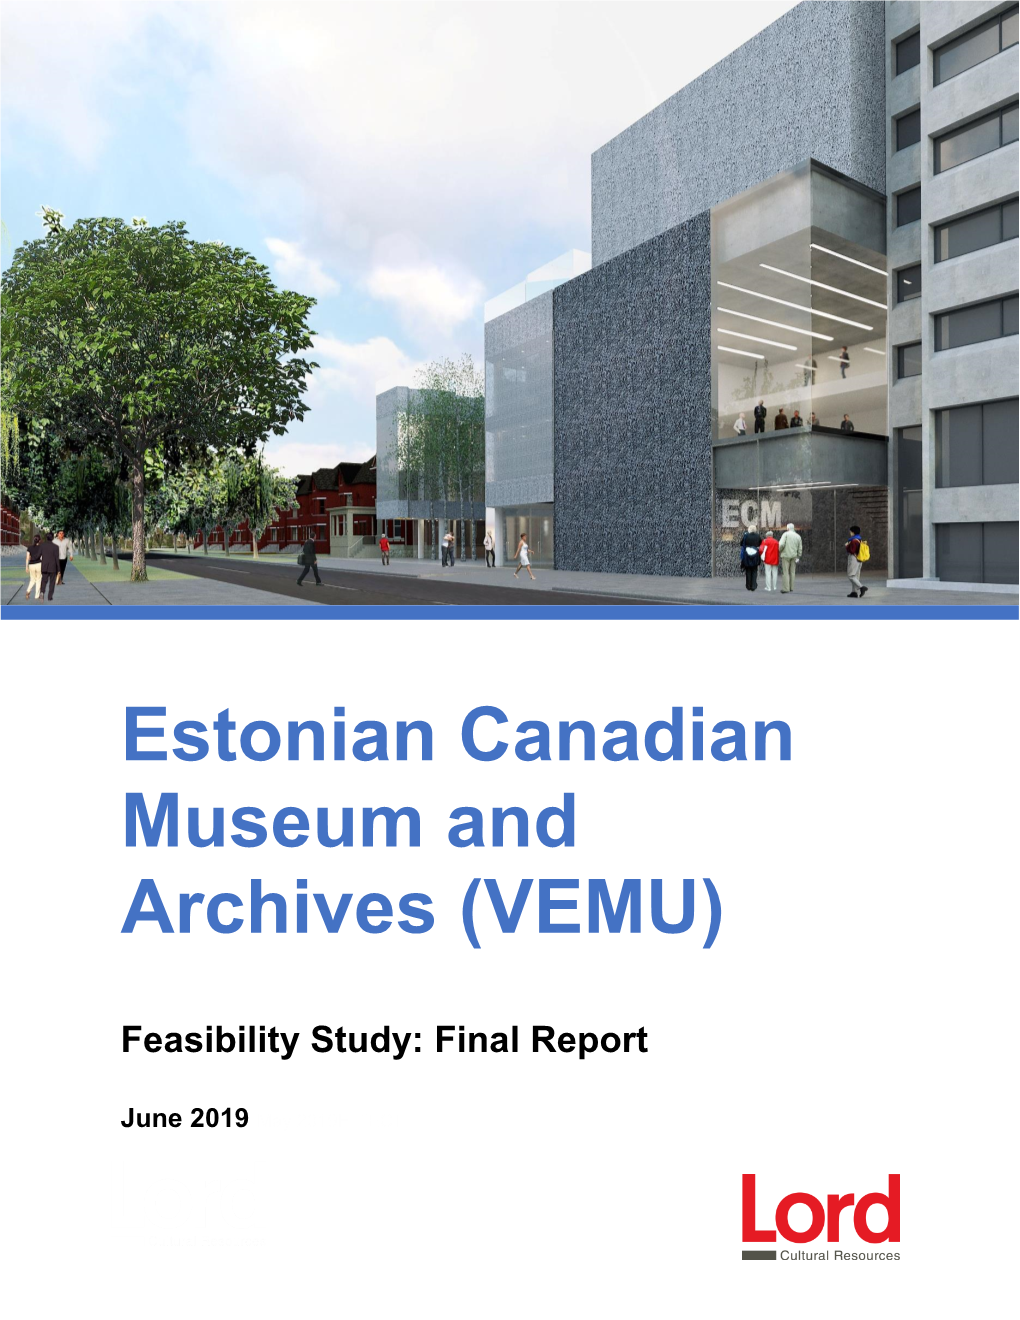 Estonian Canadian Museum and Archives (VEMU) Feasibility Study by Lord Cultural Resources